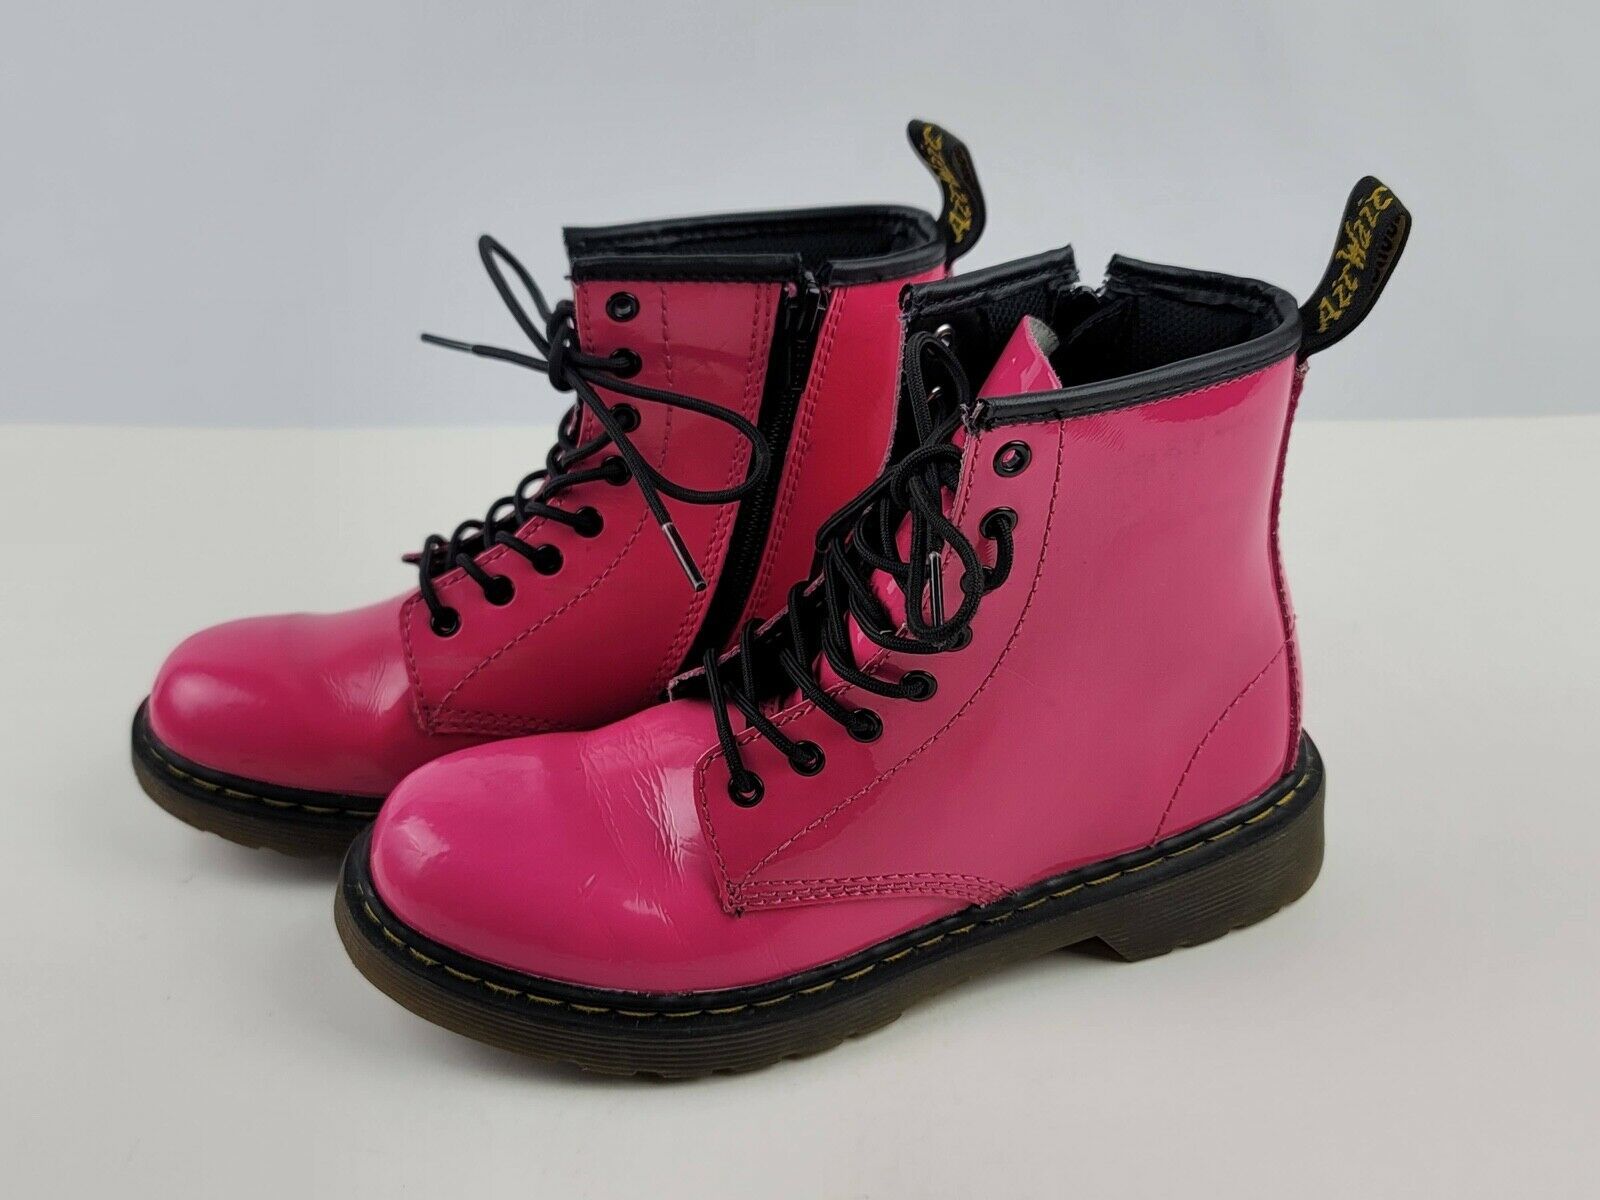 Primary image for Dr. Martens Girls Size 3 Delaney Combat Ankle Boots Glossy Pink w/Side Zipper VG